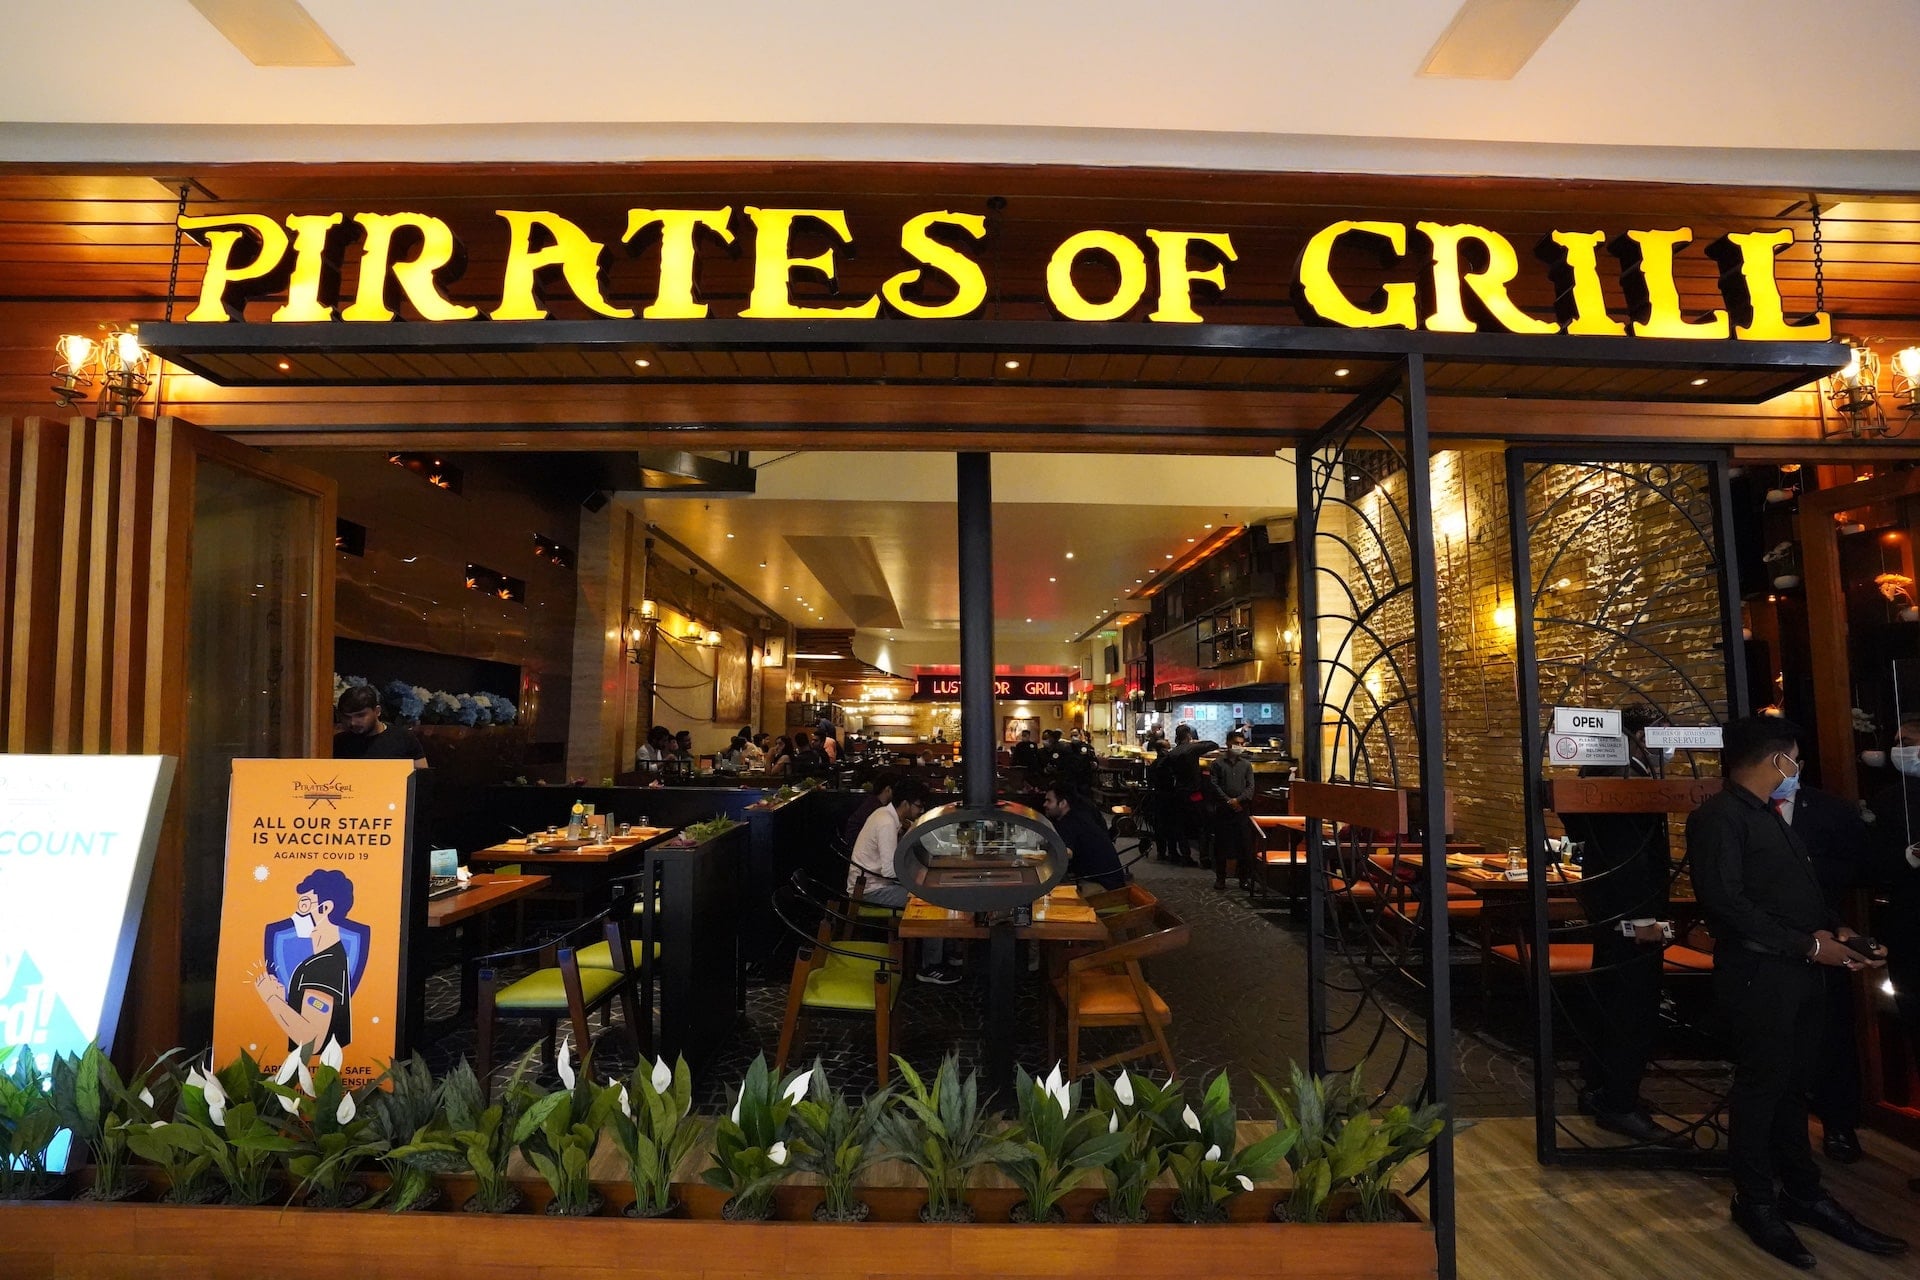 PIRATES OF THE GRILL | DLF Mall of India